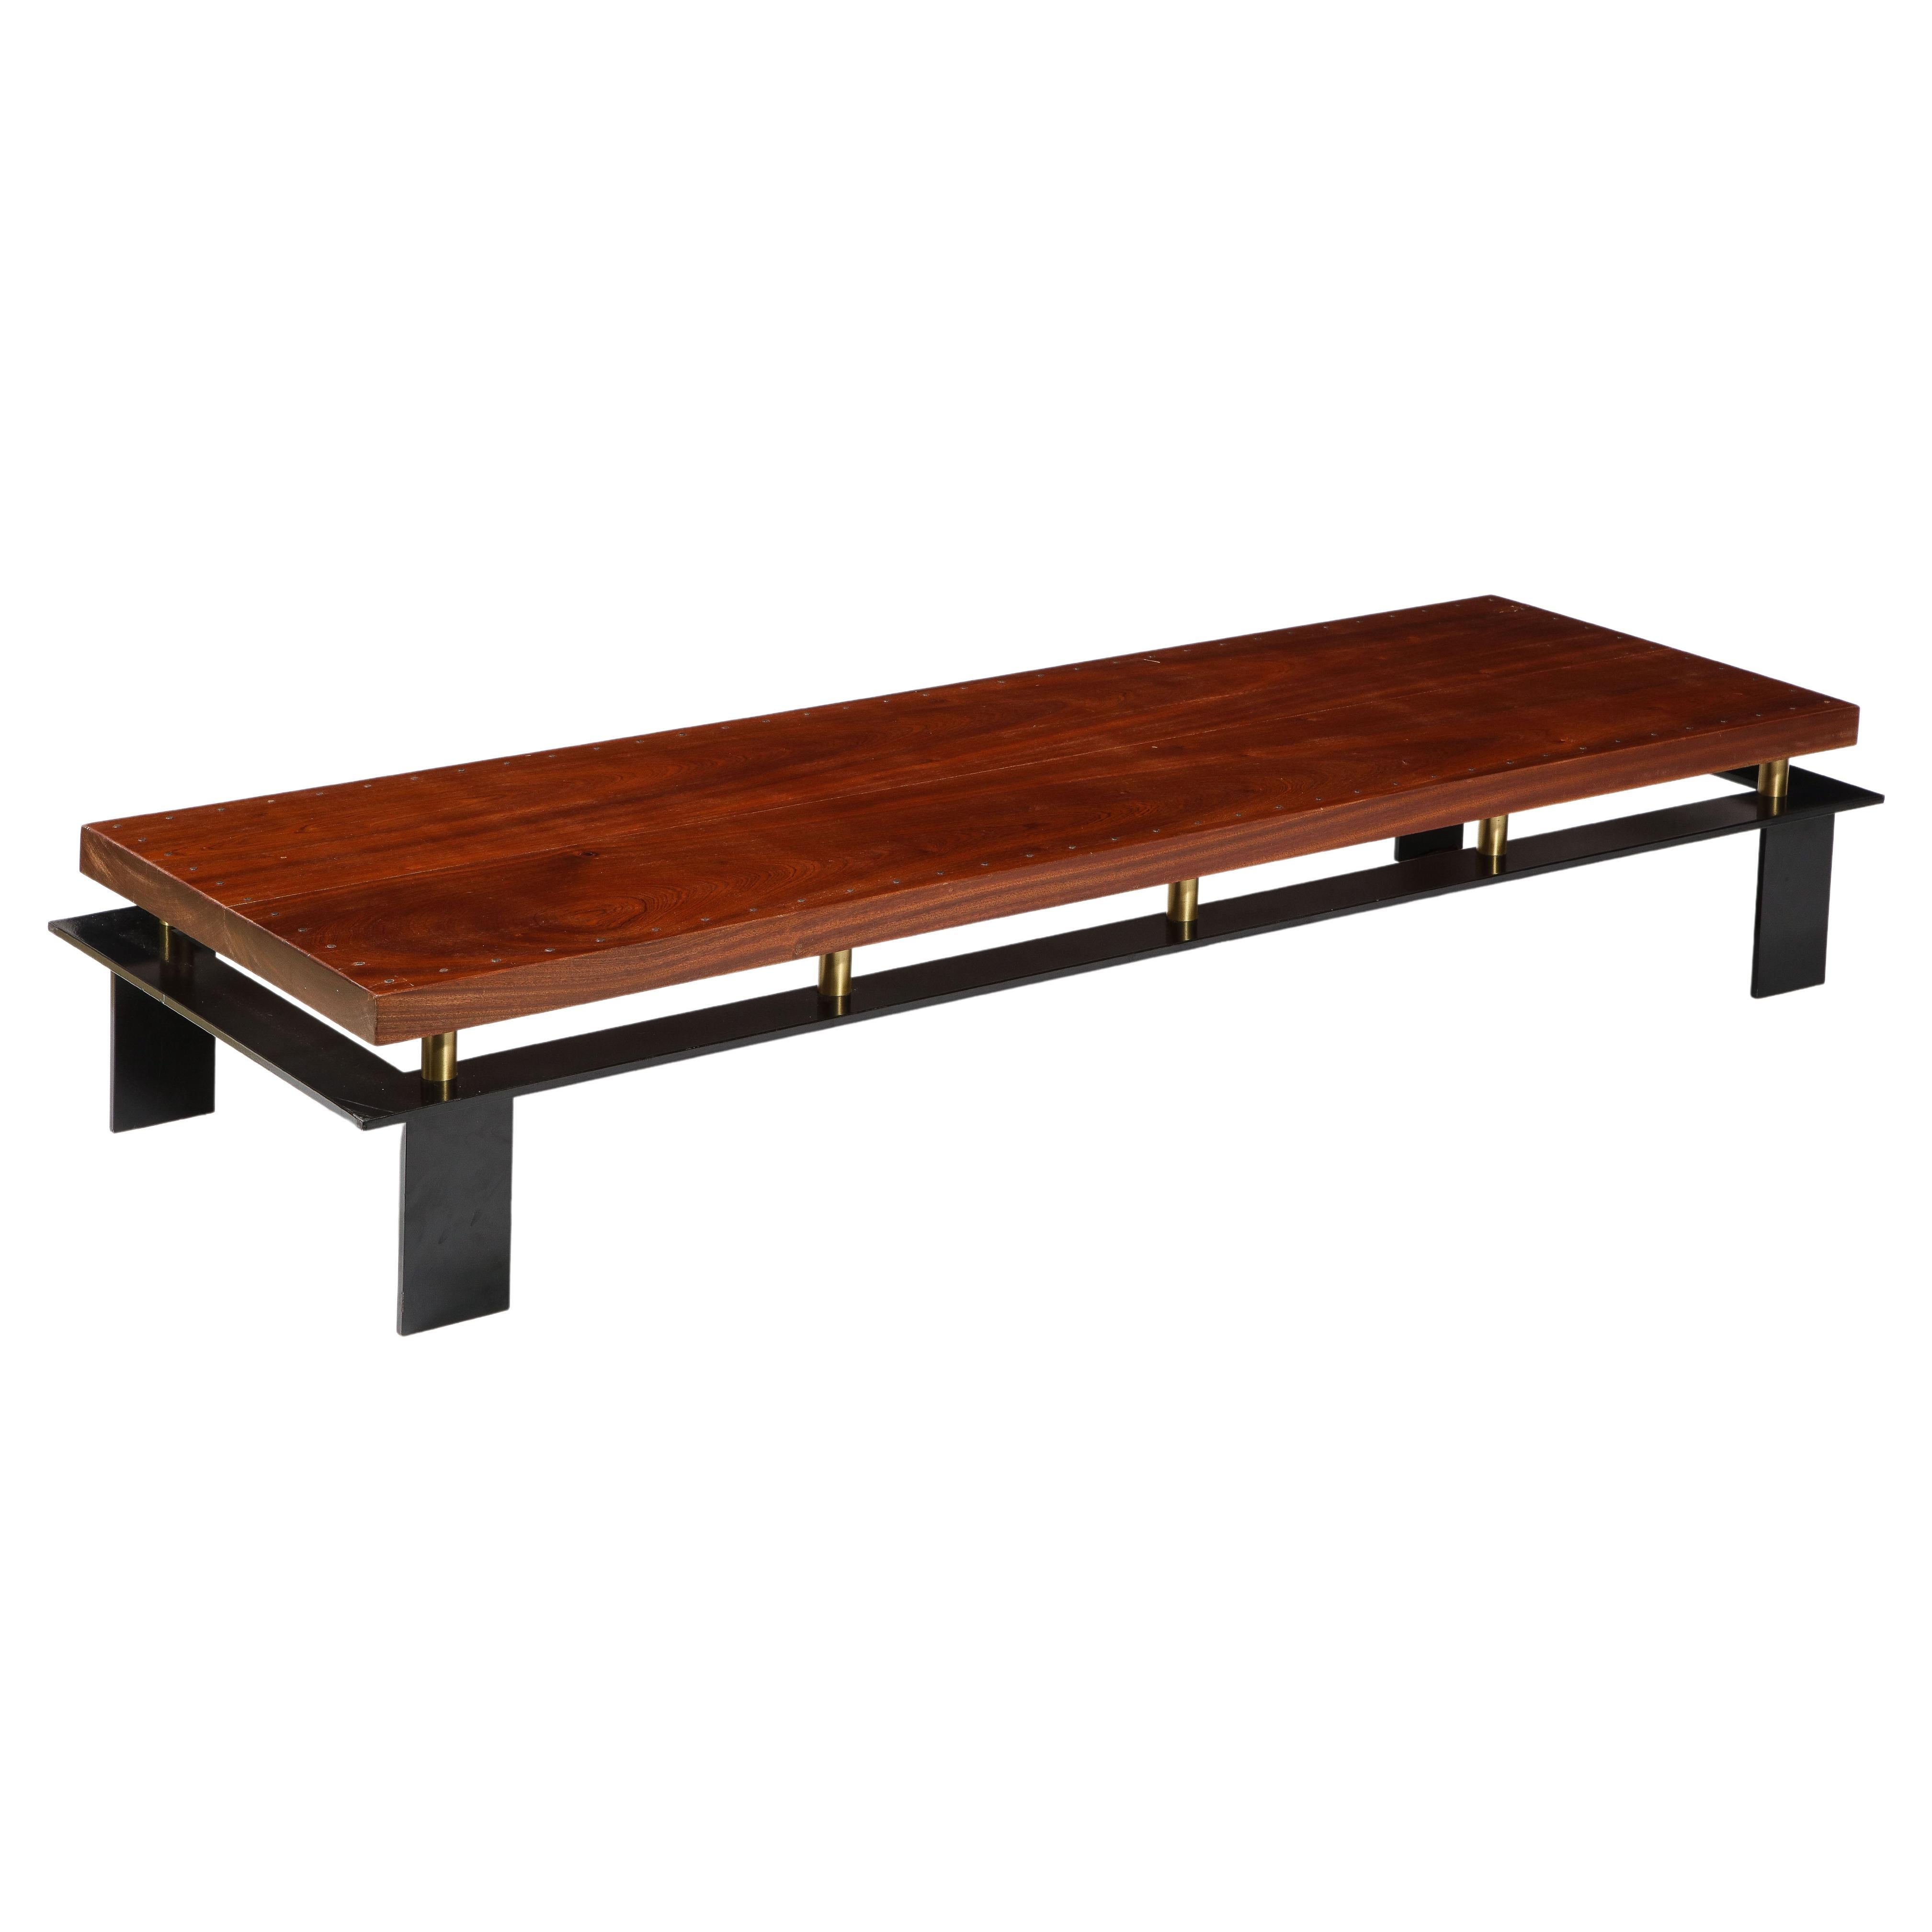 Large Long Low Modernist Steel & Walnut Coffee Table, France 1970's For Sale